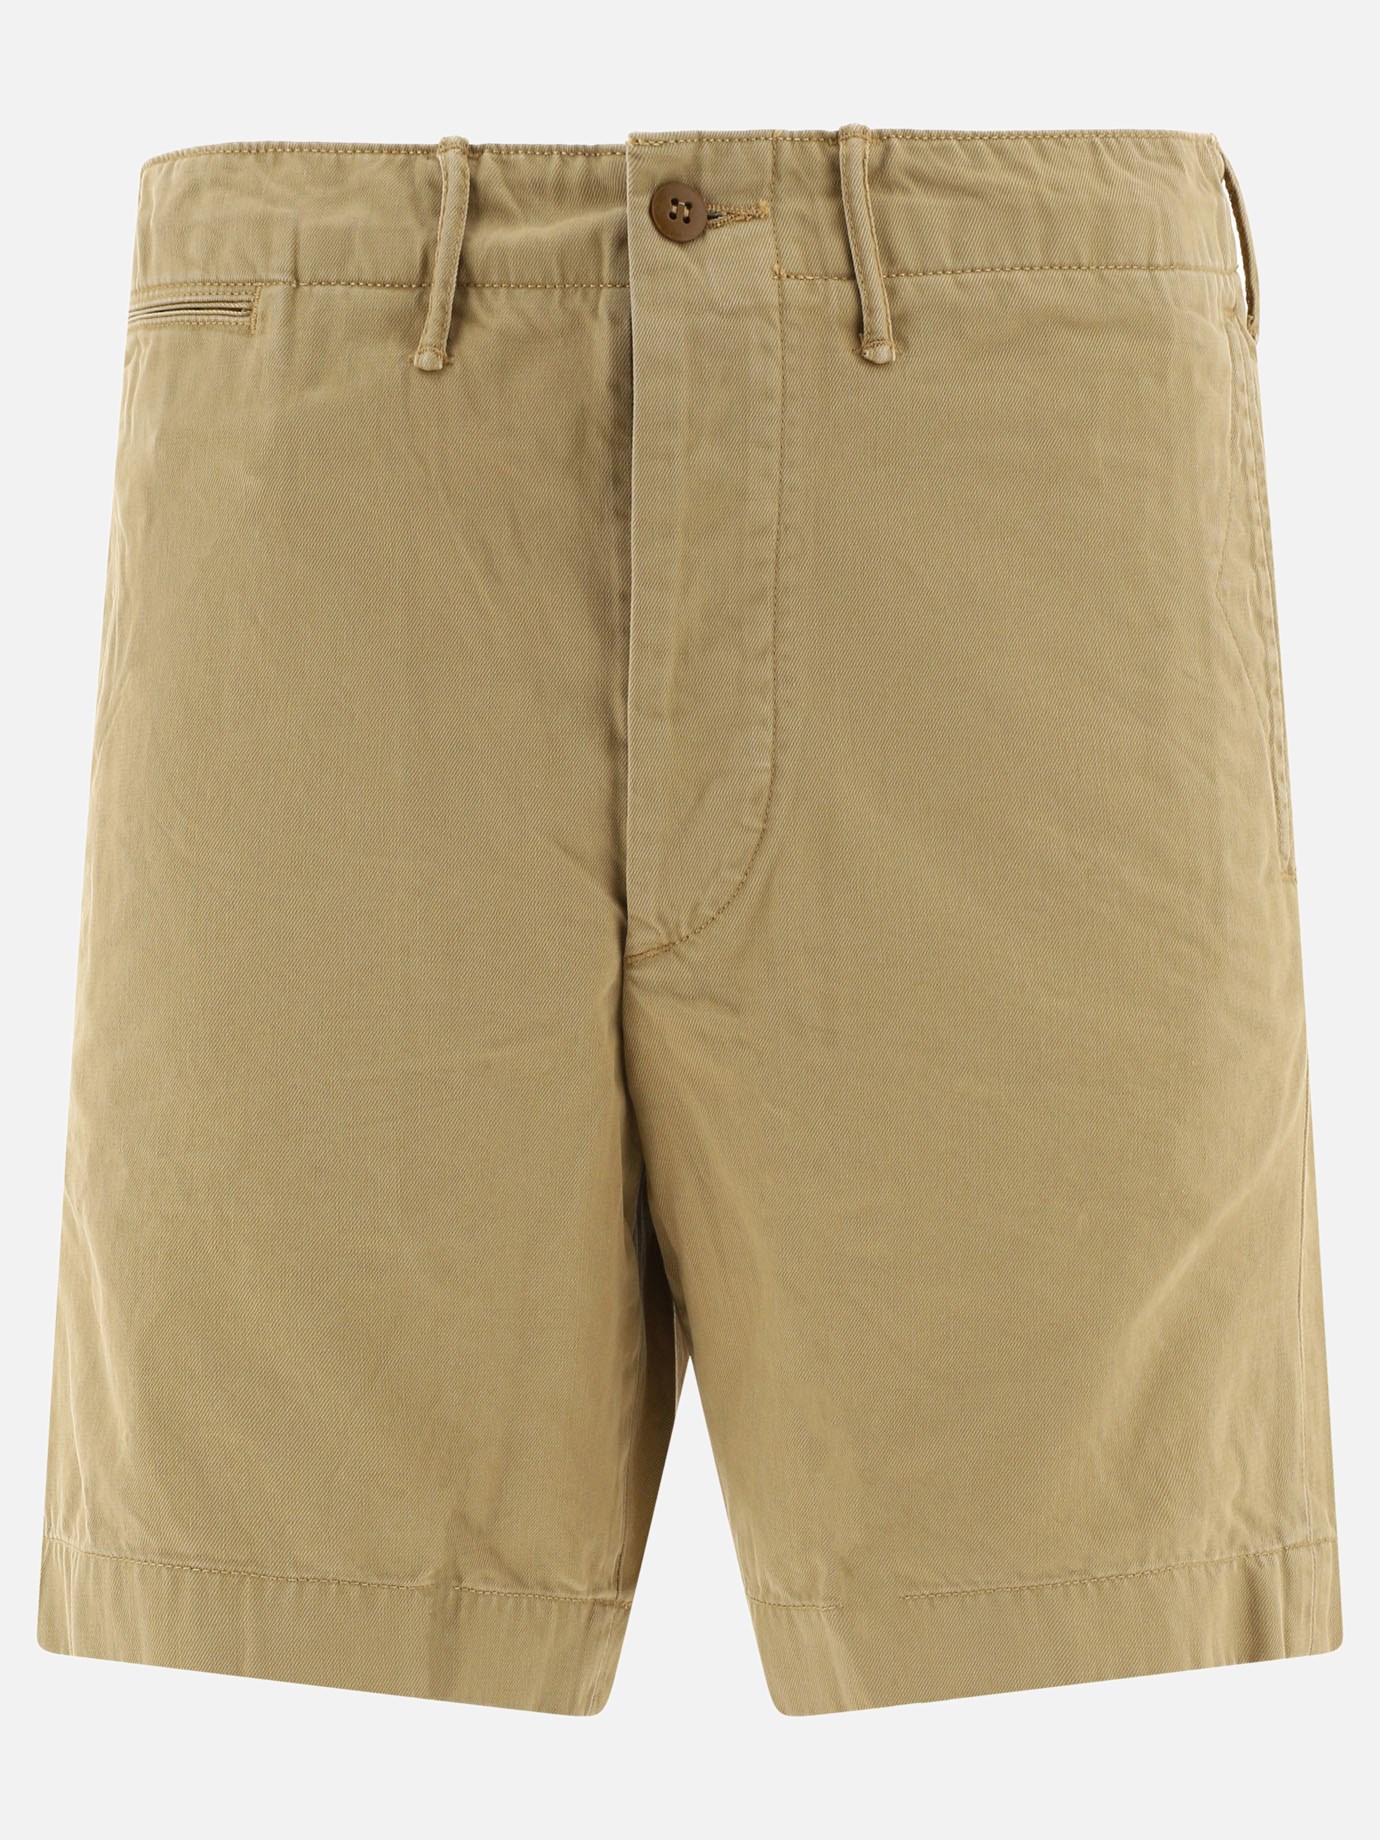  Officer's  shorts by RRL by Ralph Lauren